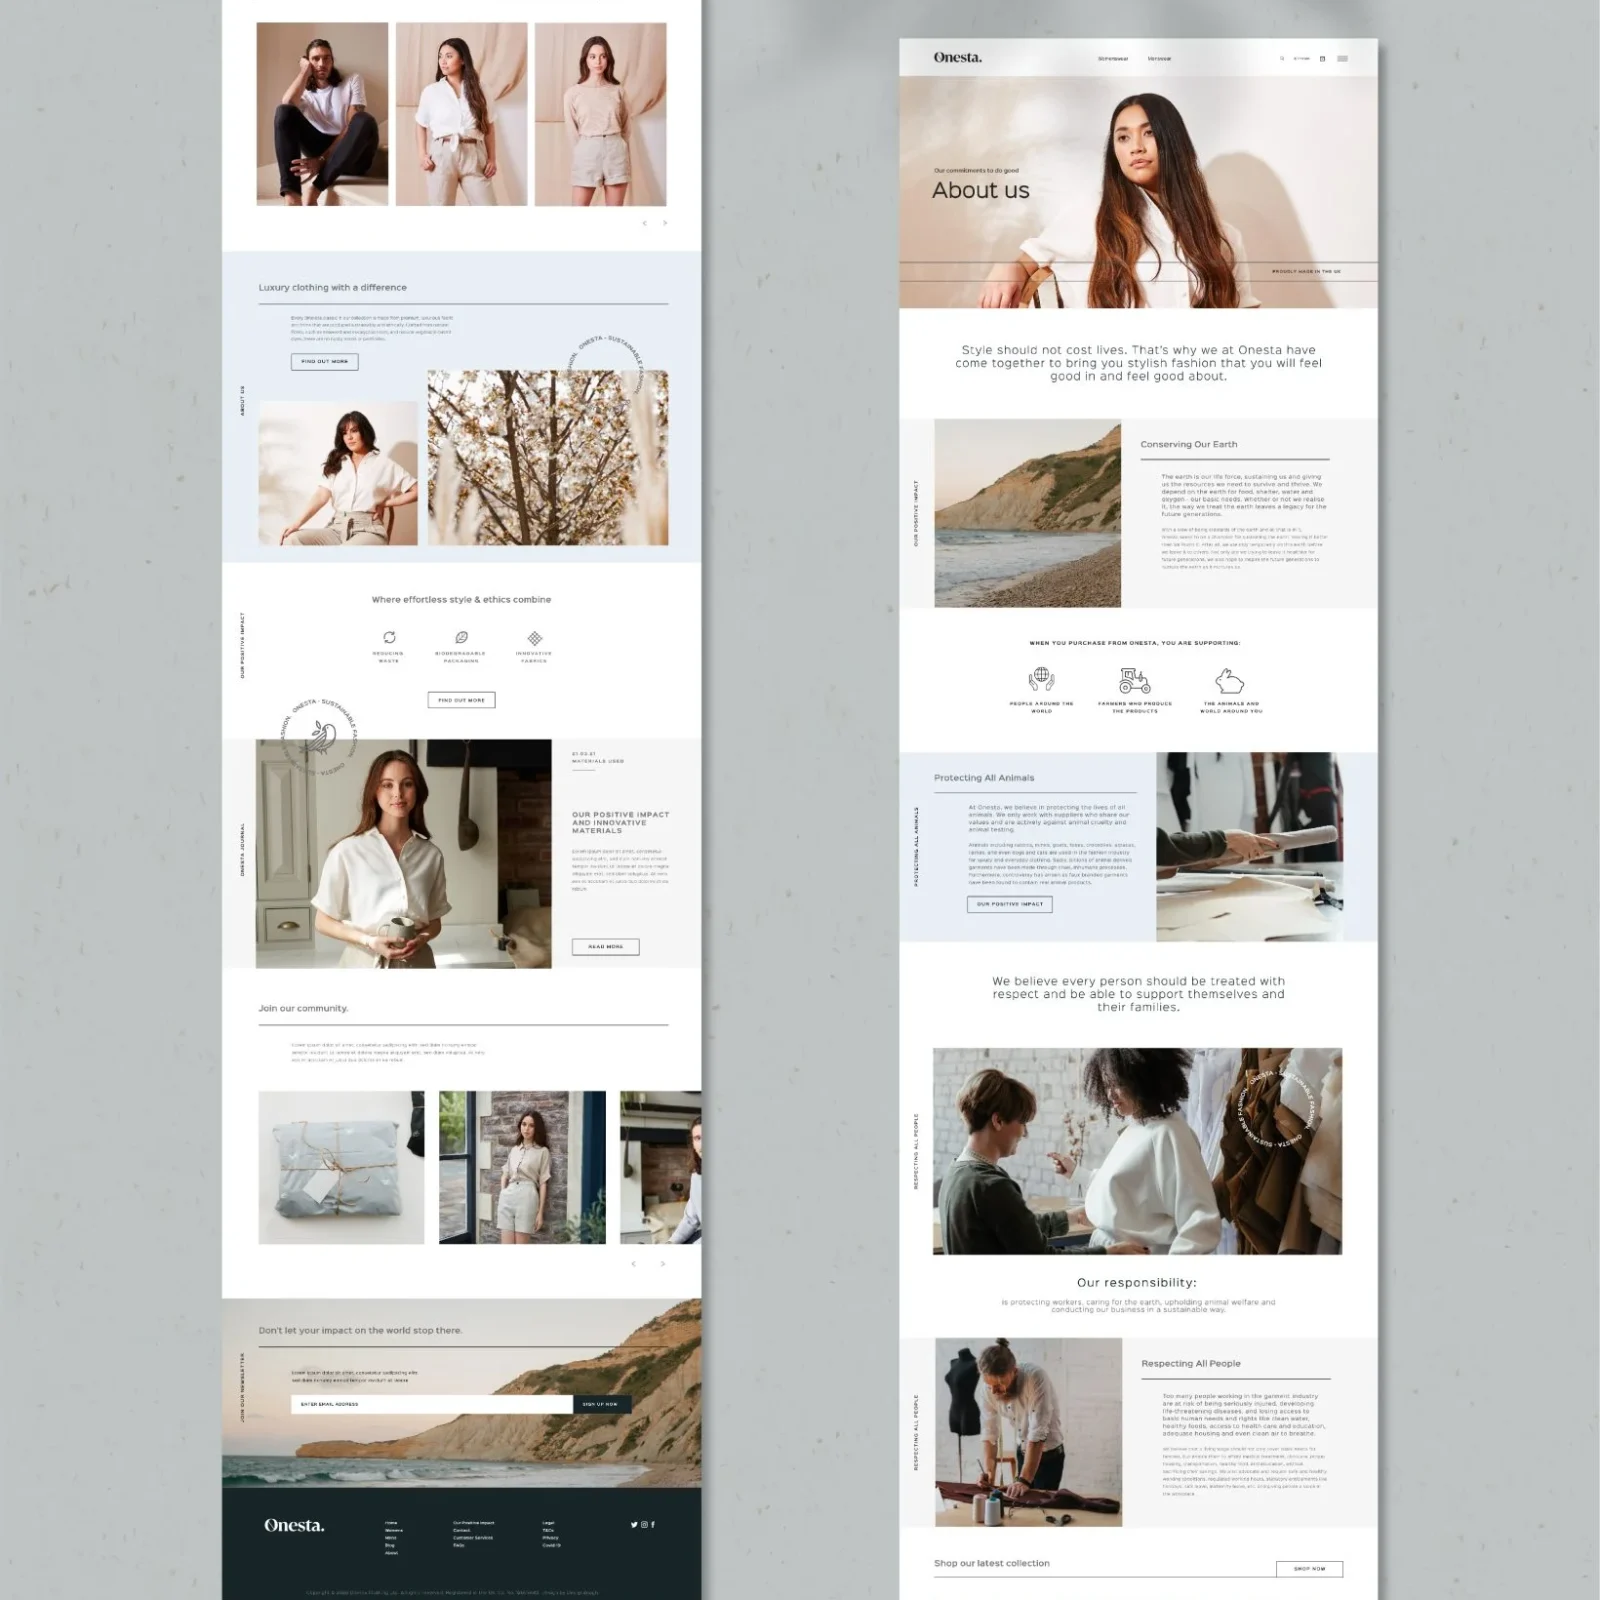 A website development layout featuring a fashion brand, including multiple pages with images of a model in various poses and outfits, text sections detailing the brand, and user interface elements like menus and buttons.